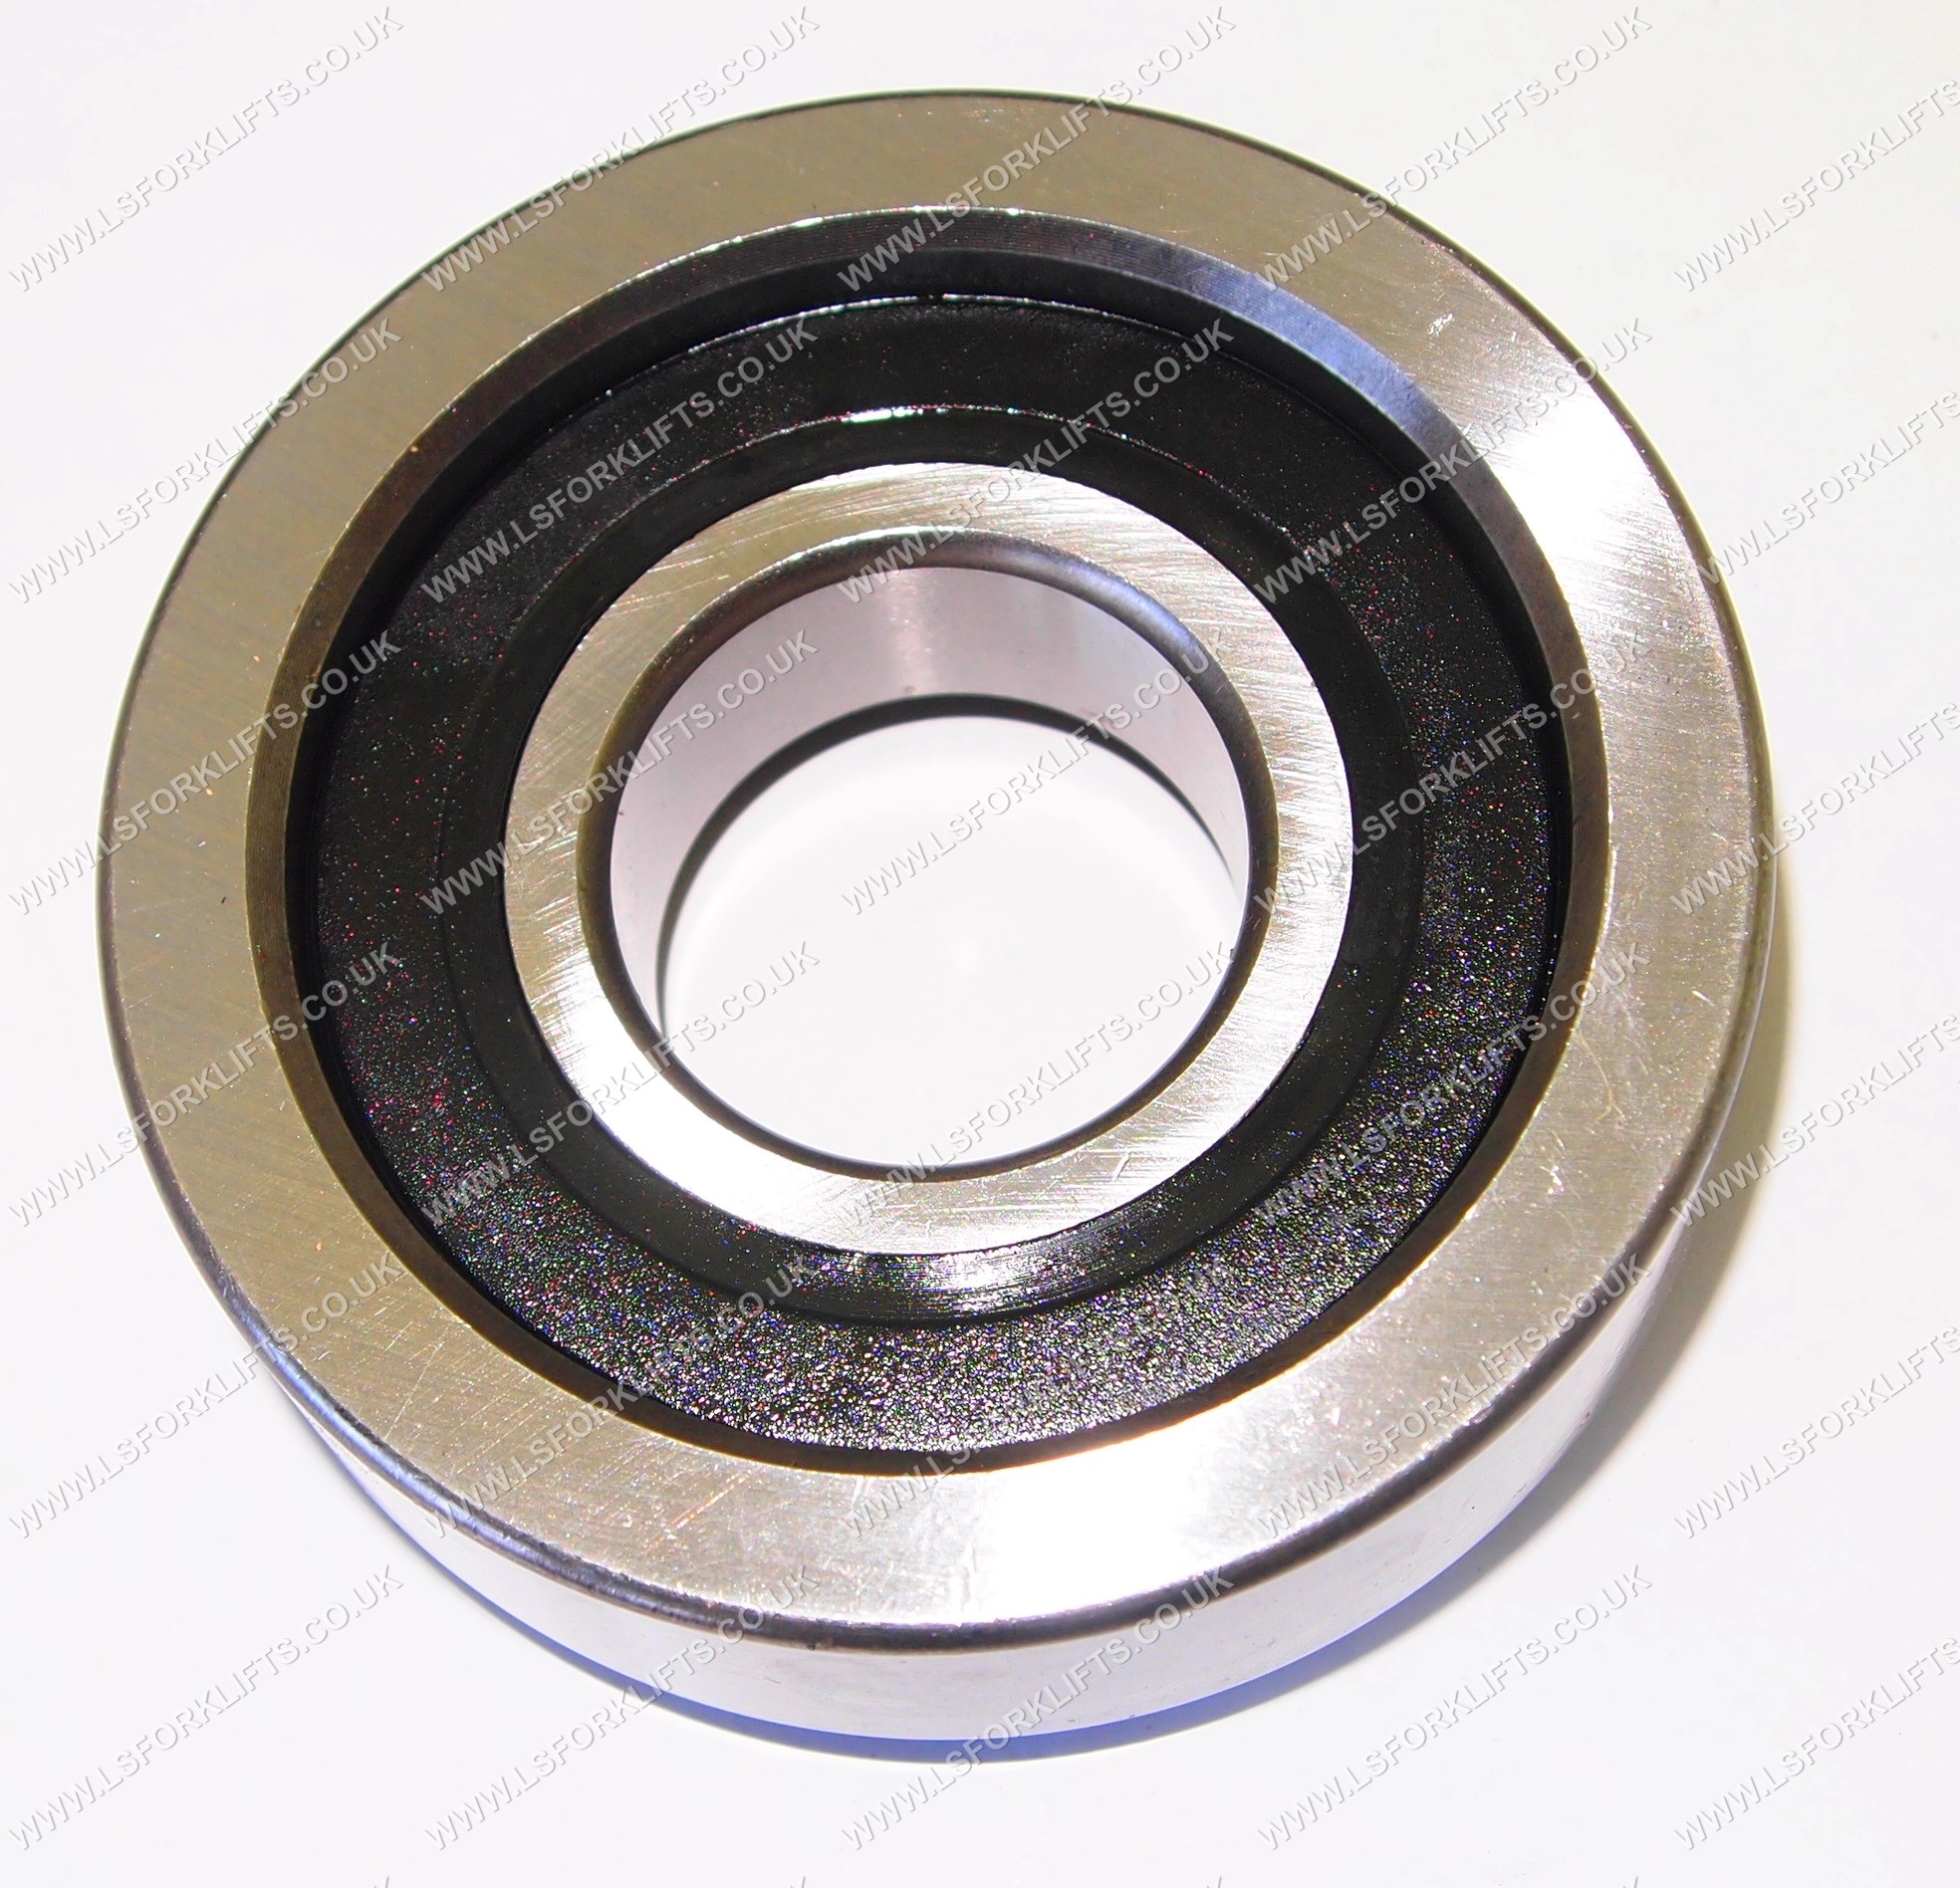 Details about   1425-5362 LPM Taper Cup Bearing Hyster 23041914255362 SK35201229JE 